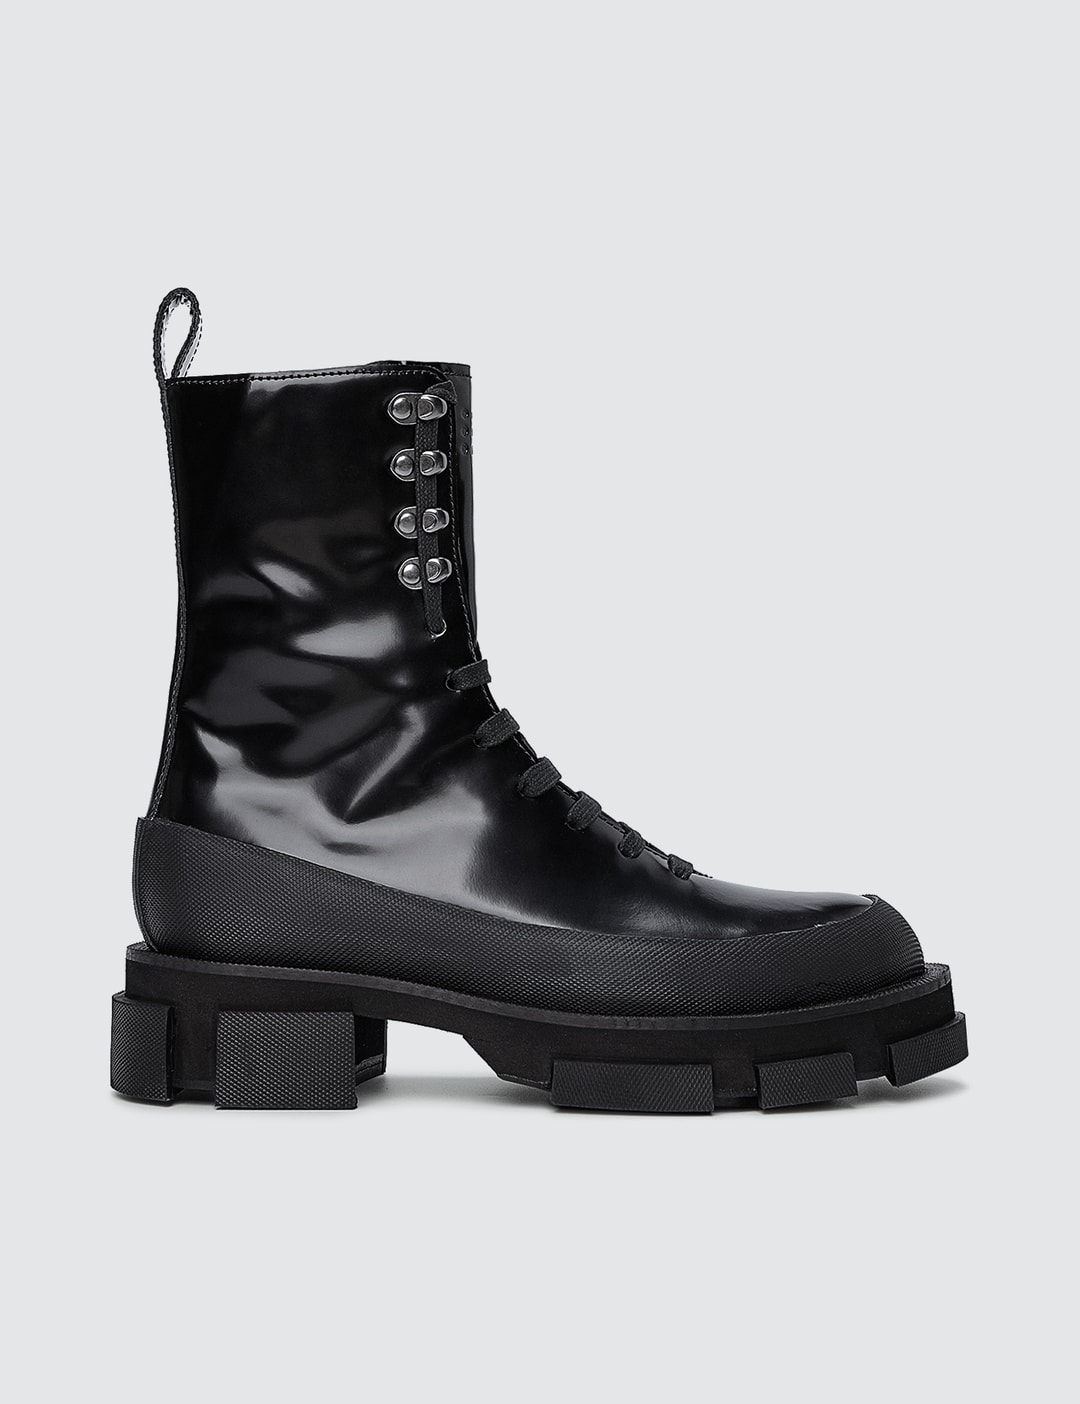 Both - Gao High Boots | HBX - Globally Curated Fashion and Lifestyle by ...